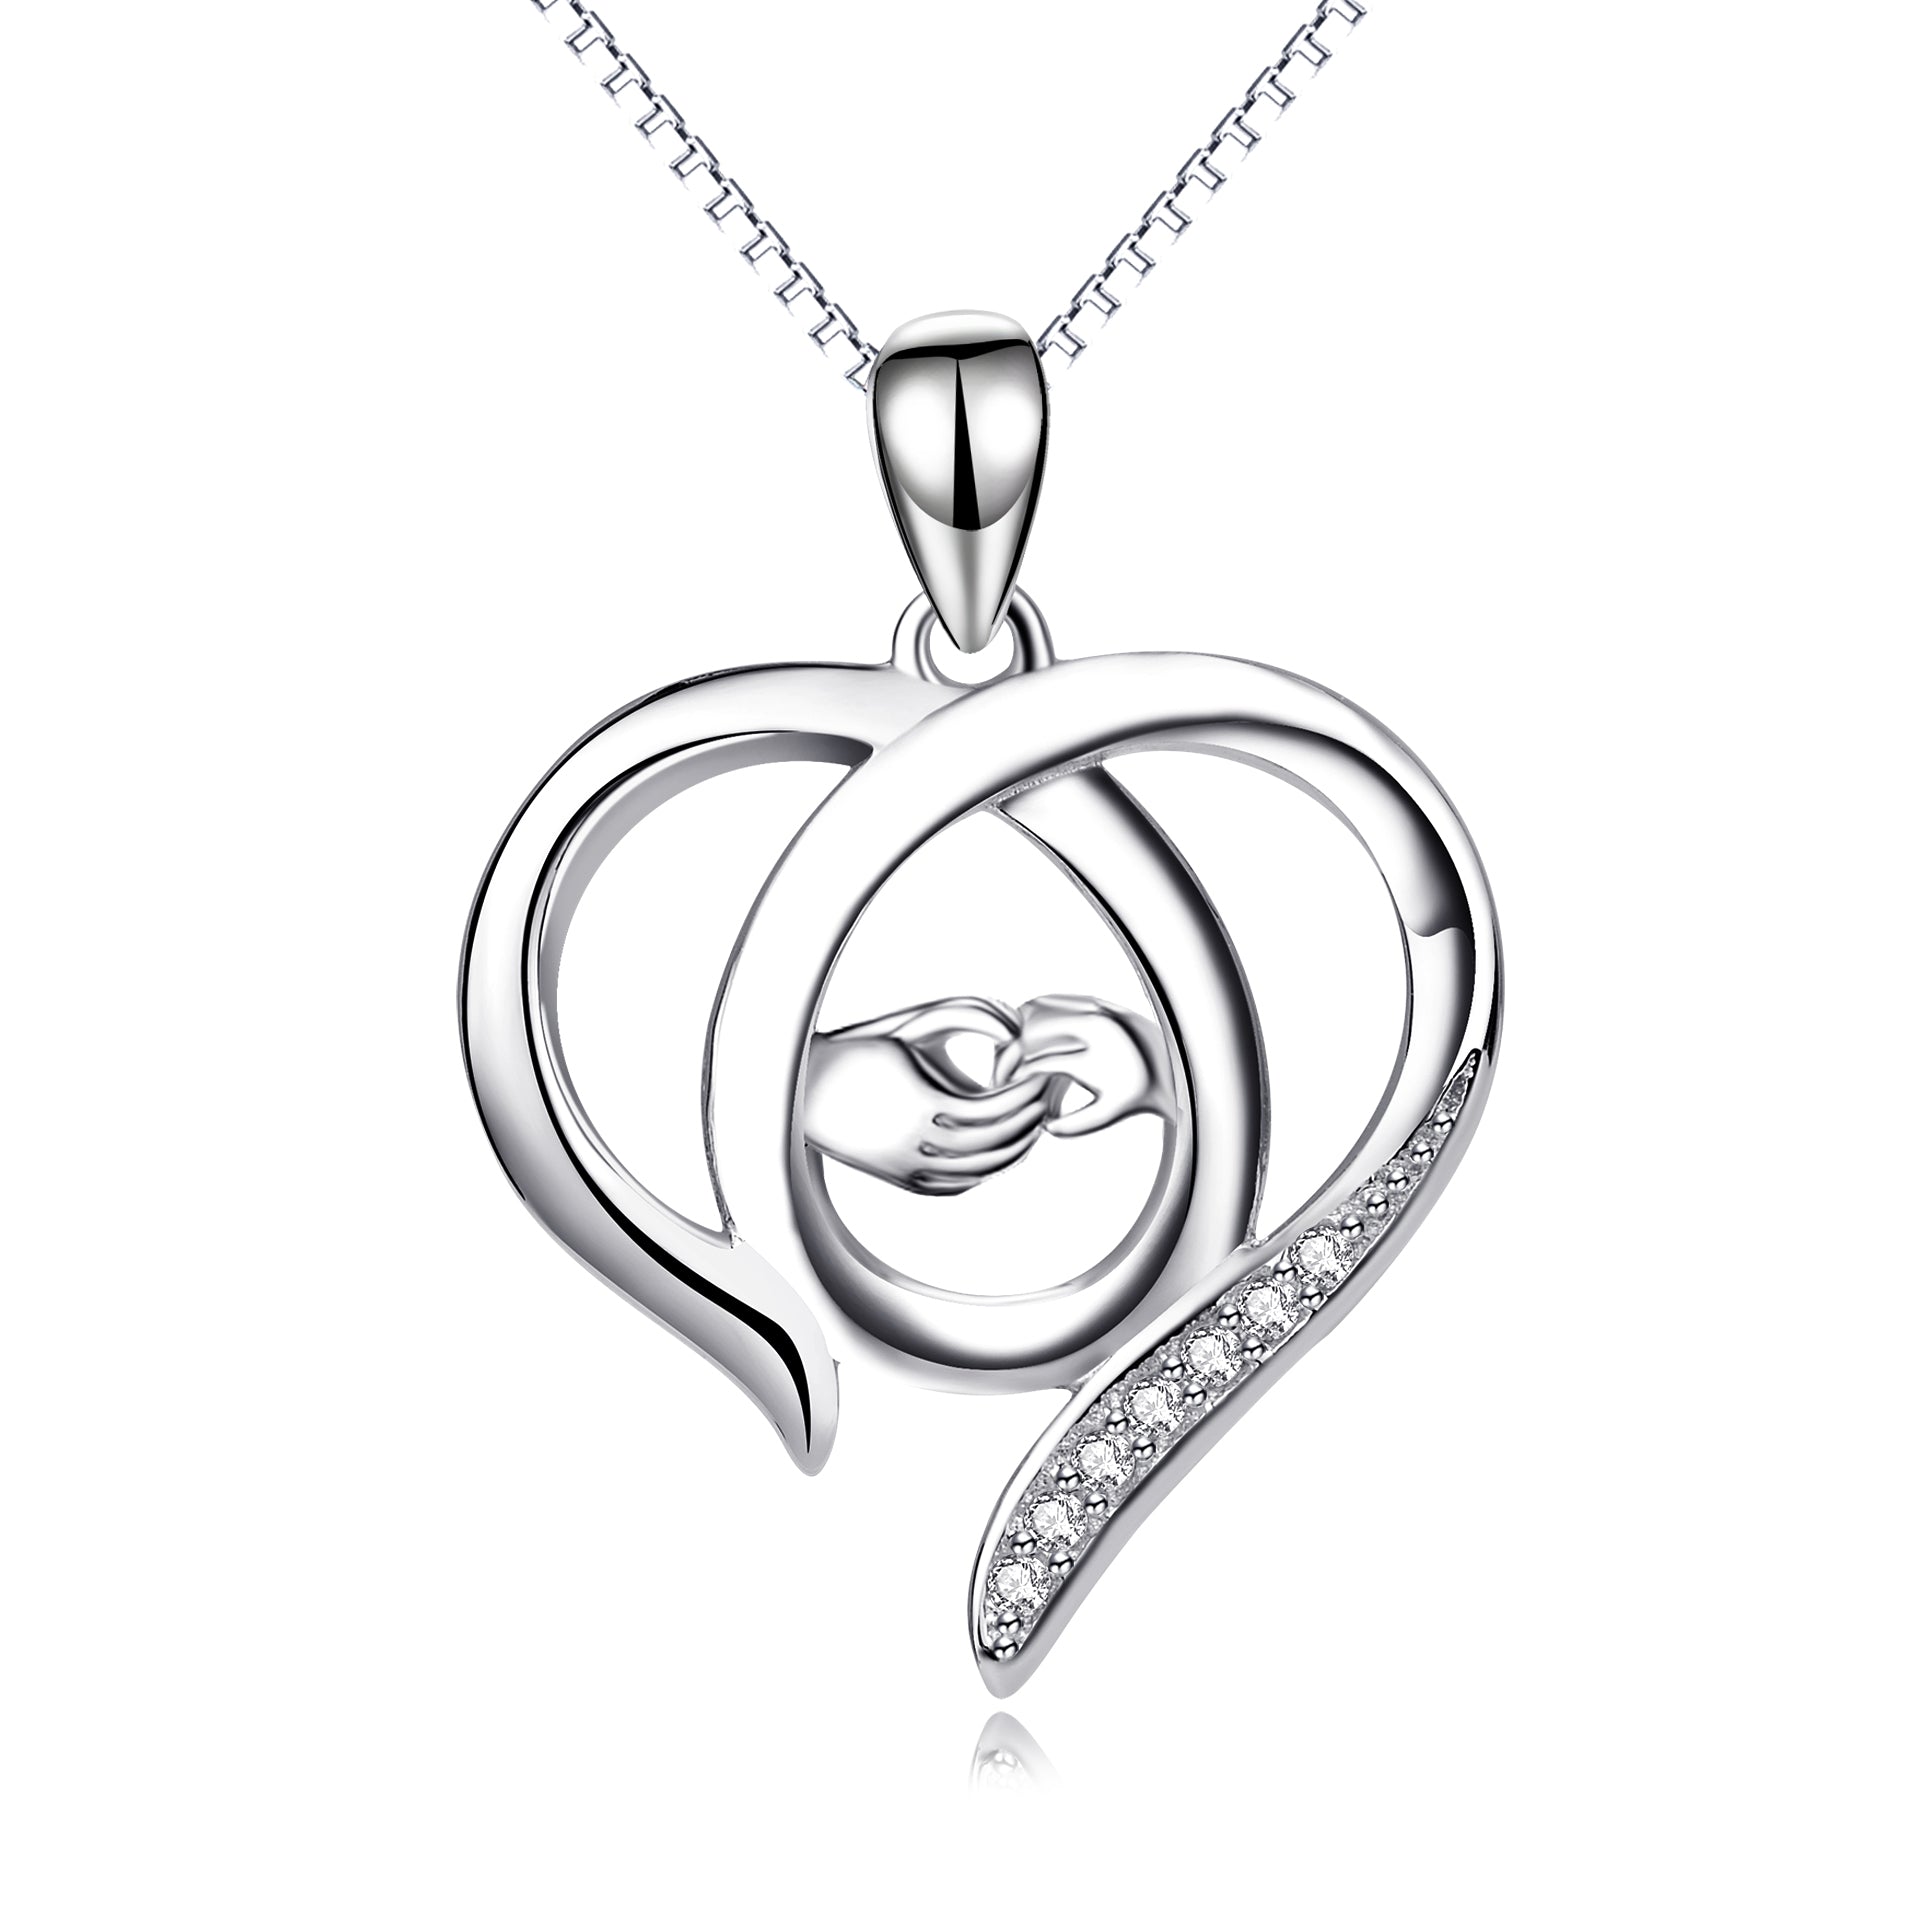 Large Heart Pendant Silver Necklace Wholesale Girlfriend Loving Hearts Necklace Fashion